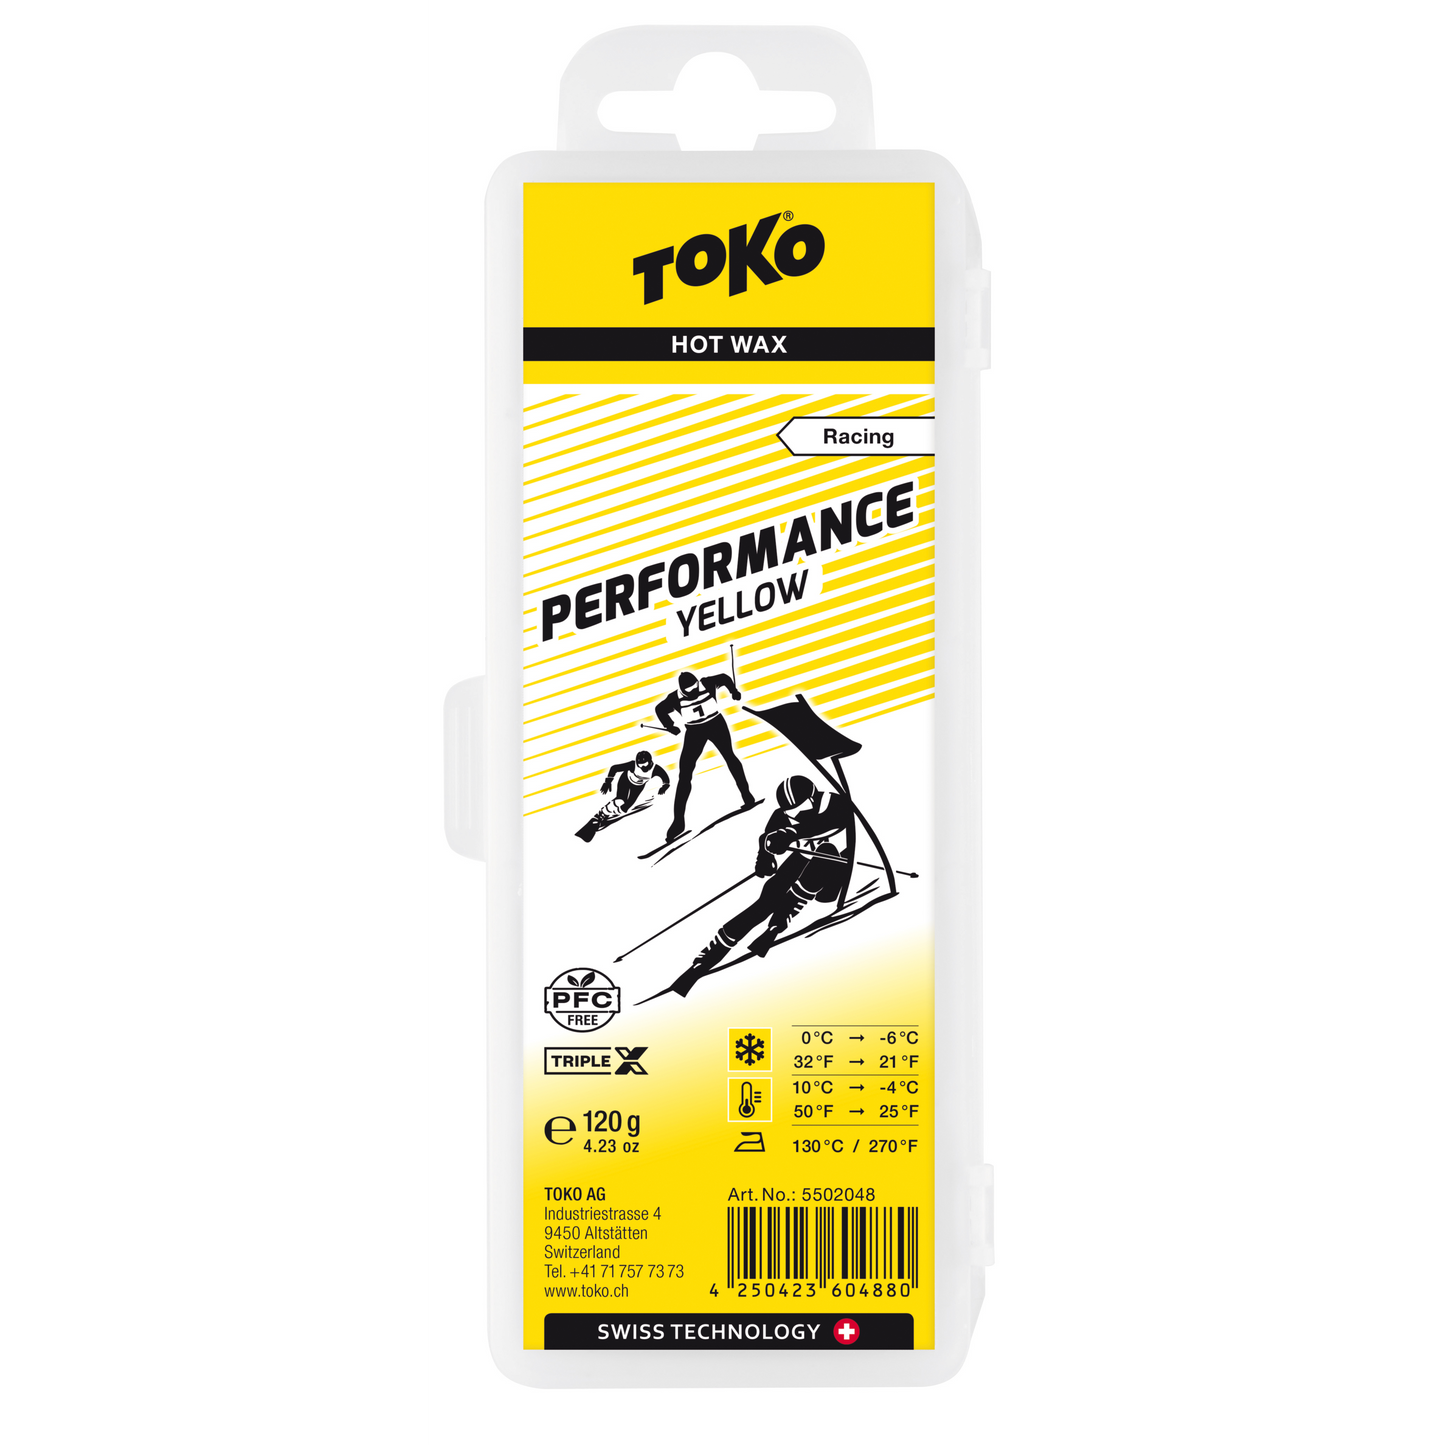 A product picture of the Toko Performance Yellow Paraffin Melt Wax